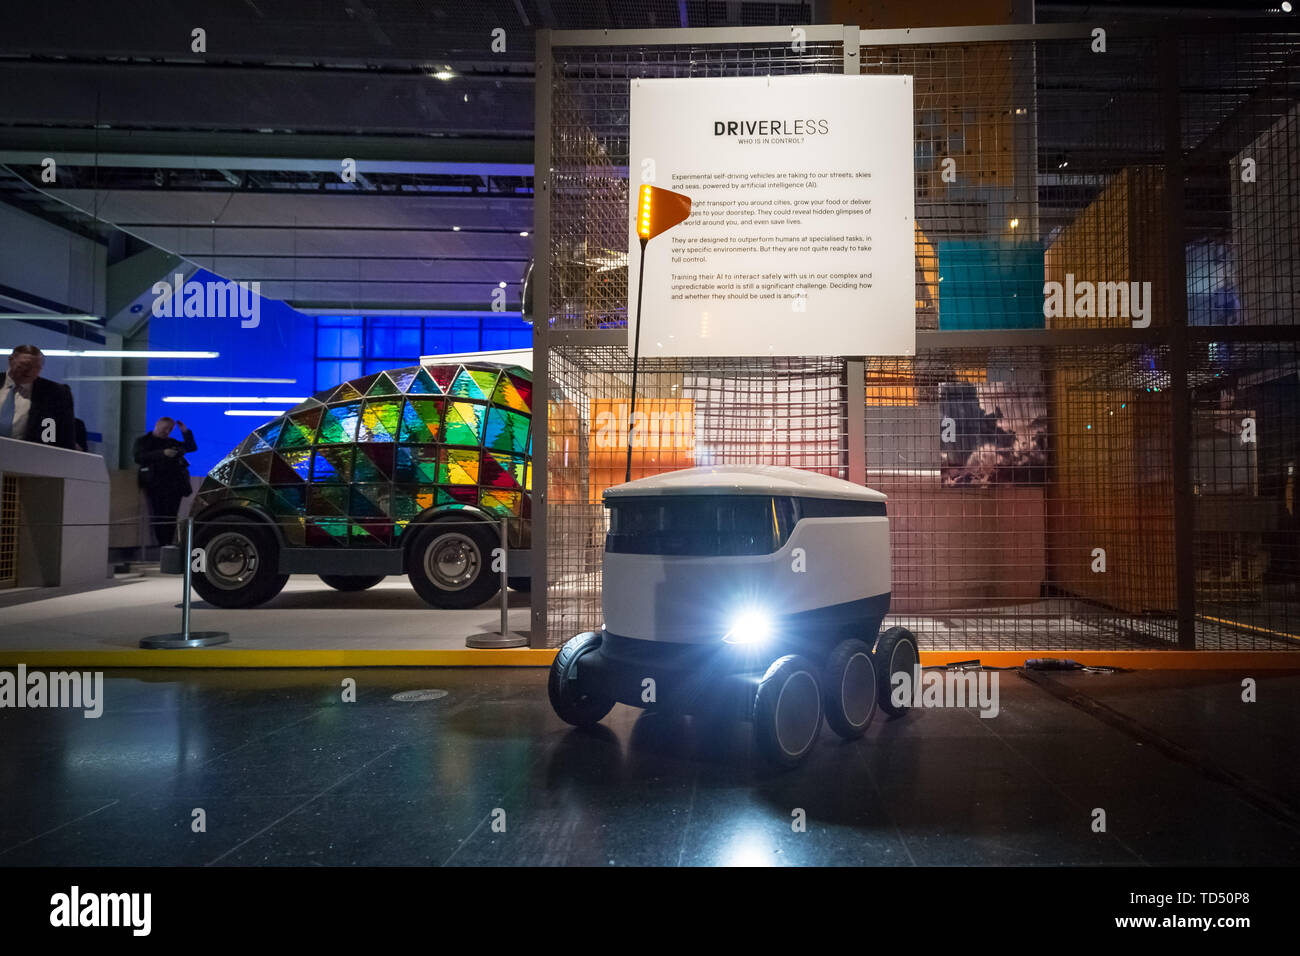 London, UK. 12th June 2019. Driverless technology 'Who is in control?' exhibition is launched the Science Museum. Pictured (centre): Starship Delivery Robot – currently in use and aiming to revolutionise food and package deliveries. Pictured Left: 'Stained Glass Driverless Sleeper Car of the Future' designed by artist Dominic Wilcox. Exploring the history of self-driving vehicles, the exhibition also examines how much control we're willing to transfer to them and how their wider deployment could shape out habits, behaviour and society. Credit: Guy Corbishley/Alamy Live News Stock Photo